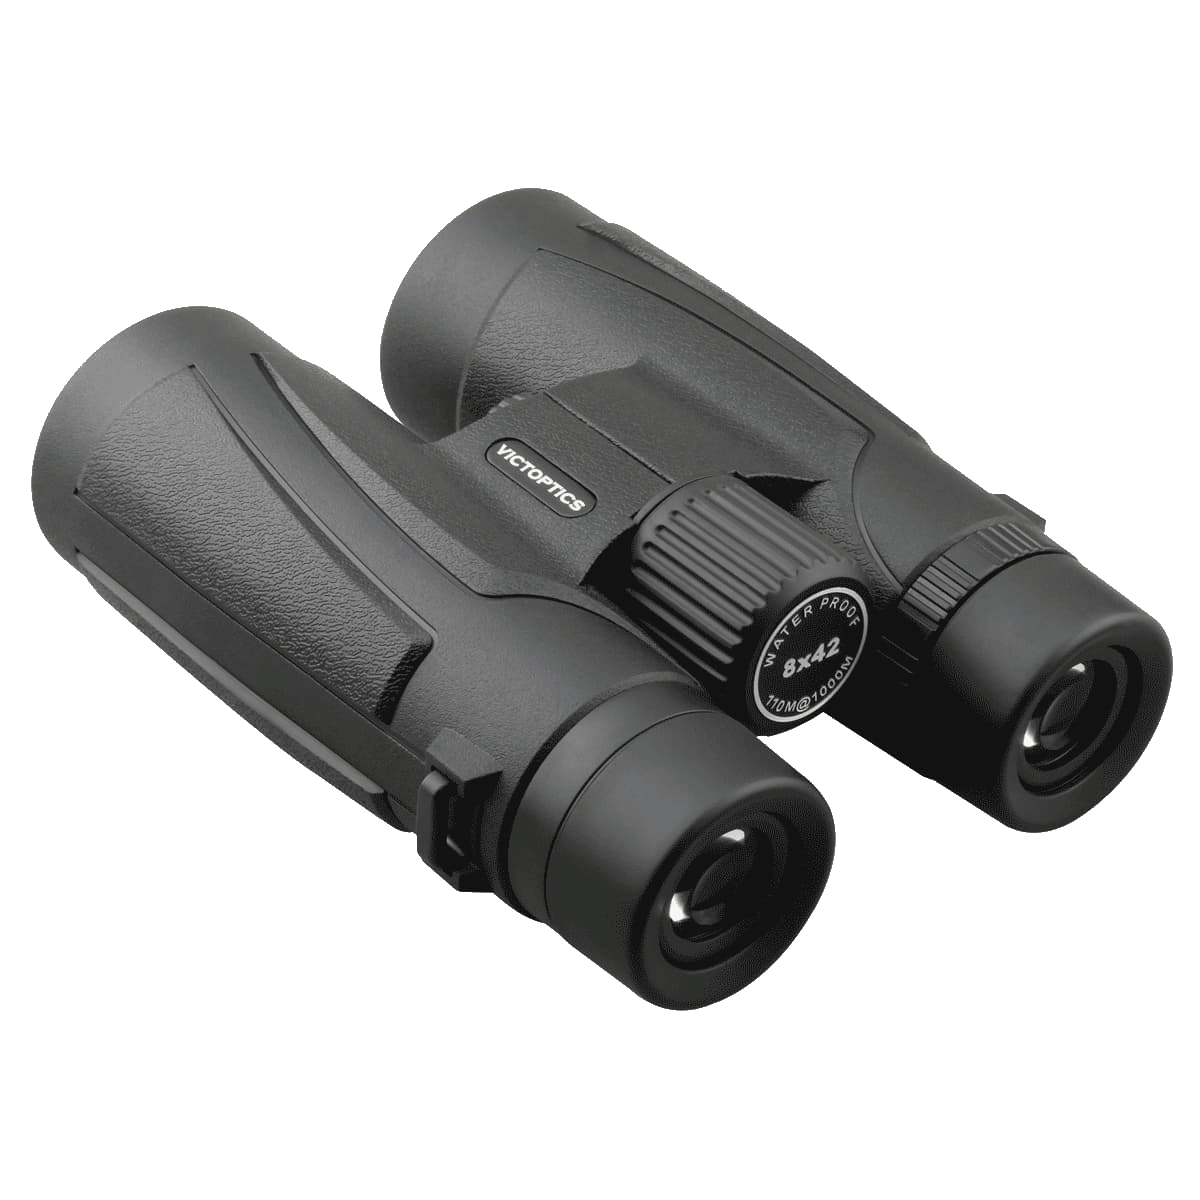 XJJZS Telescope 8x42 Roof Prism Binoculars for Adults